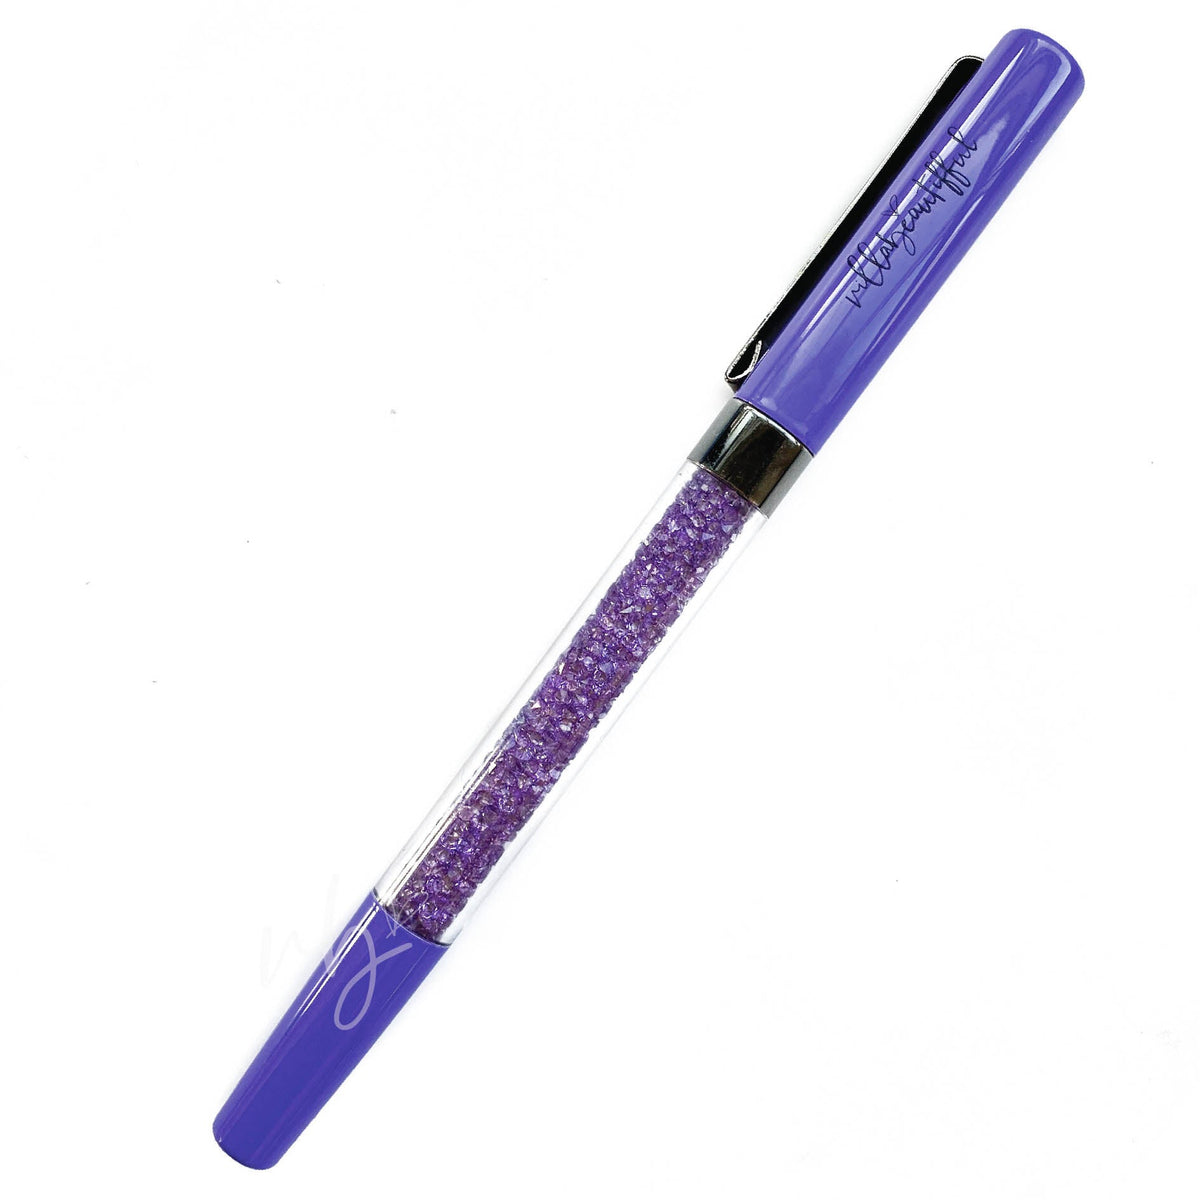 Majestic Imperfect Crystal VBPen | limited pen